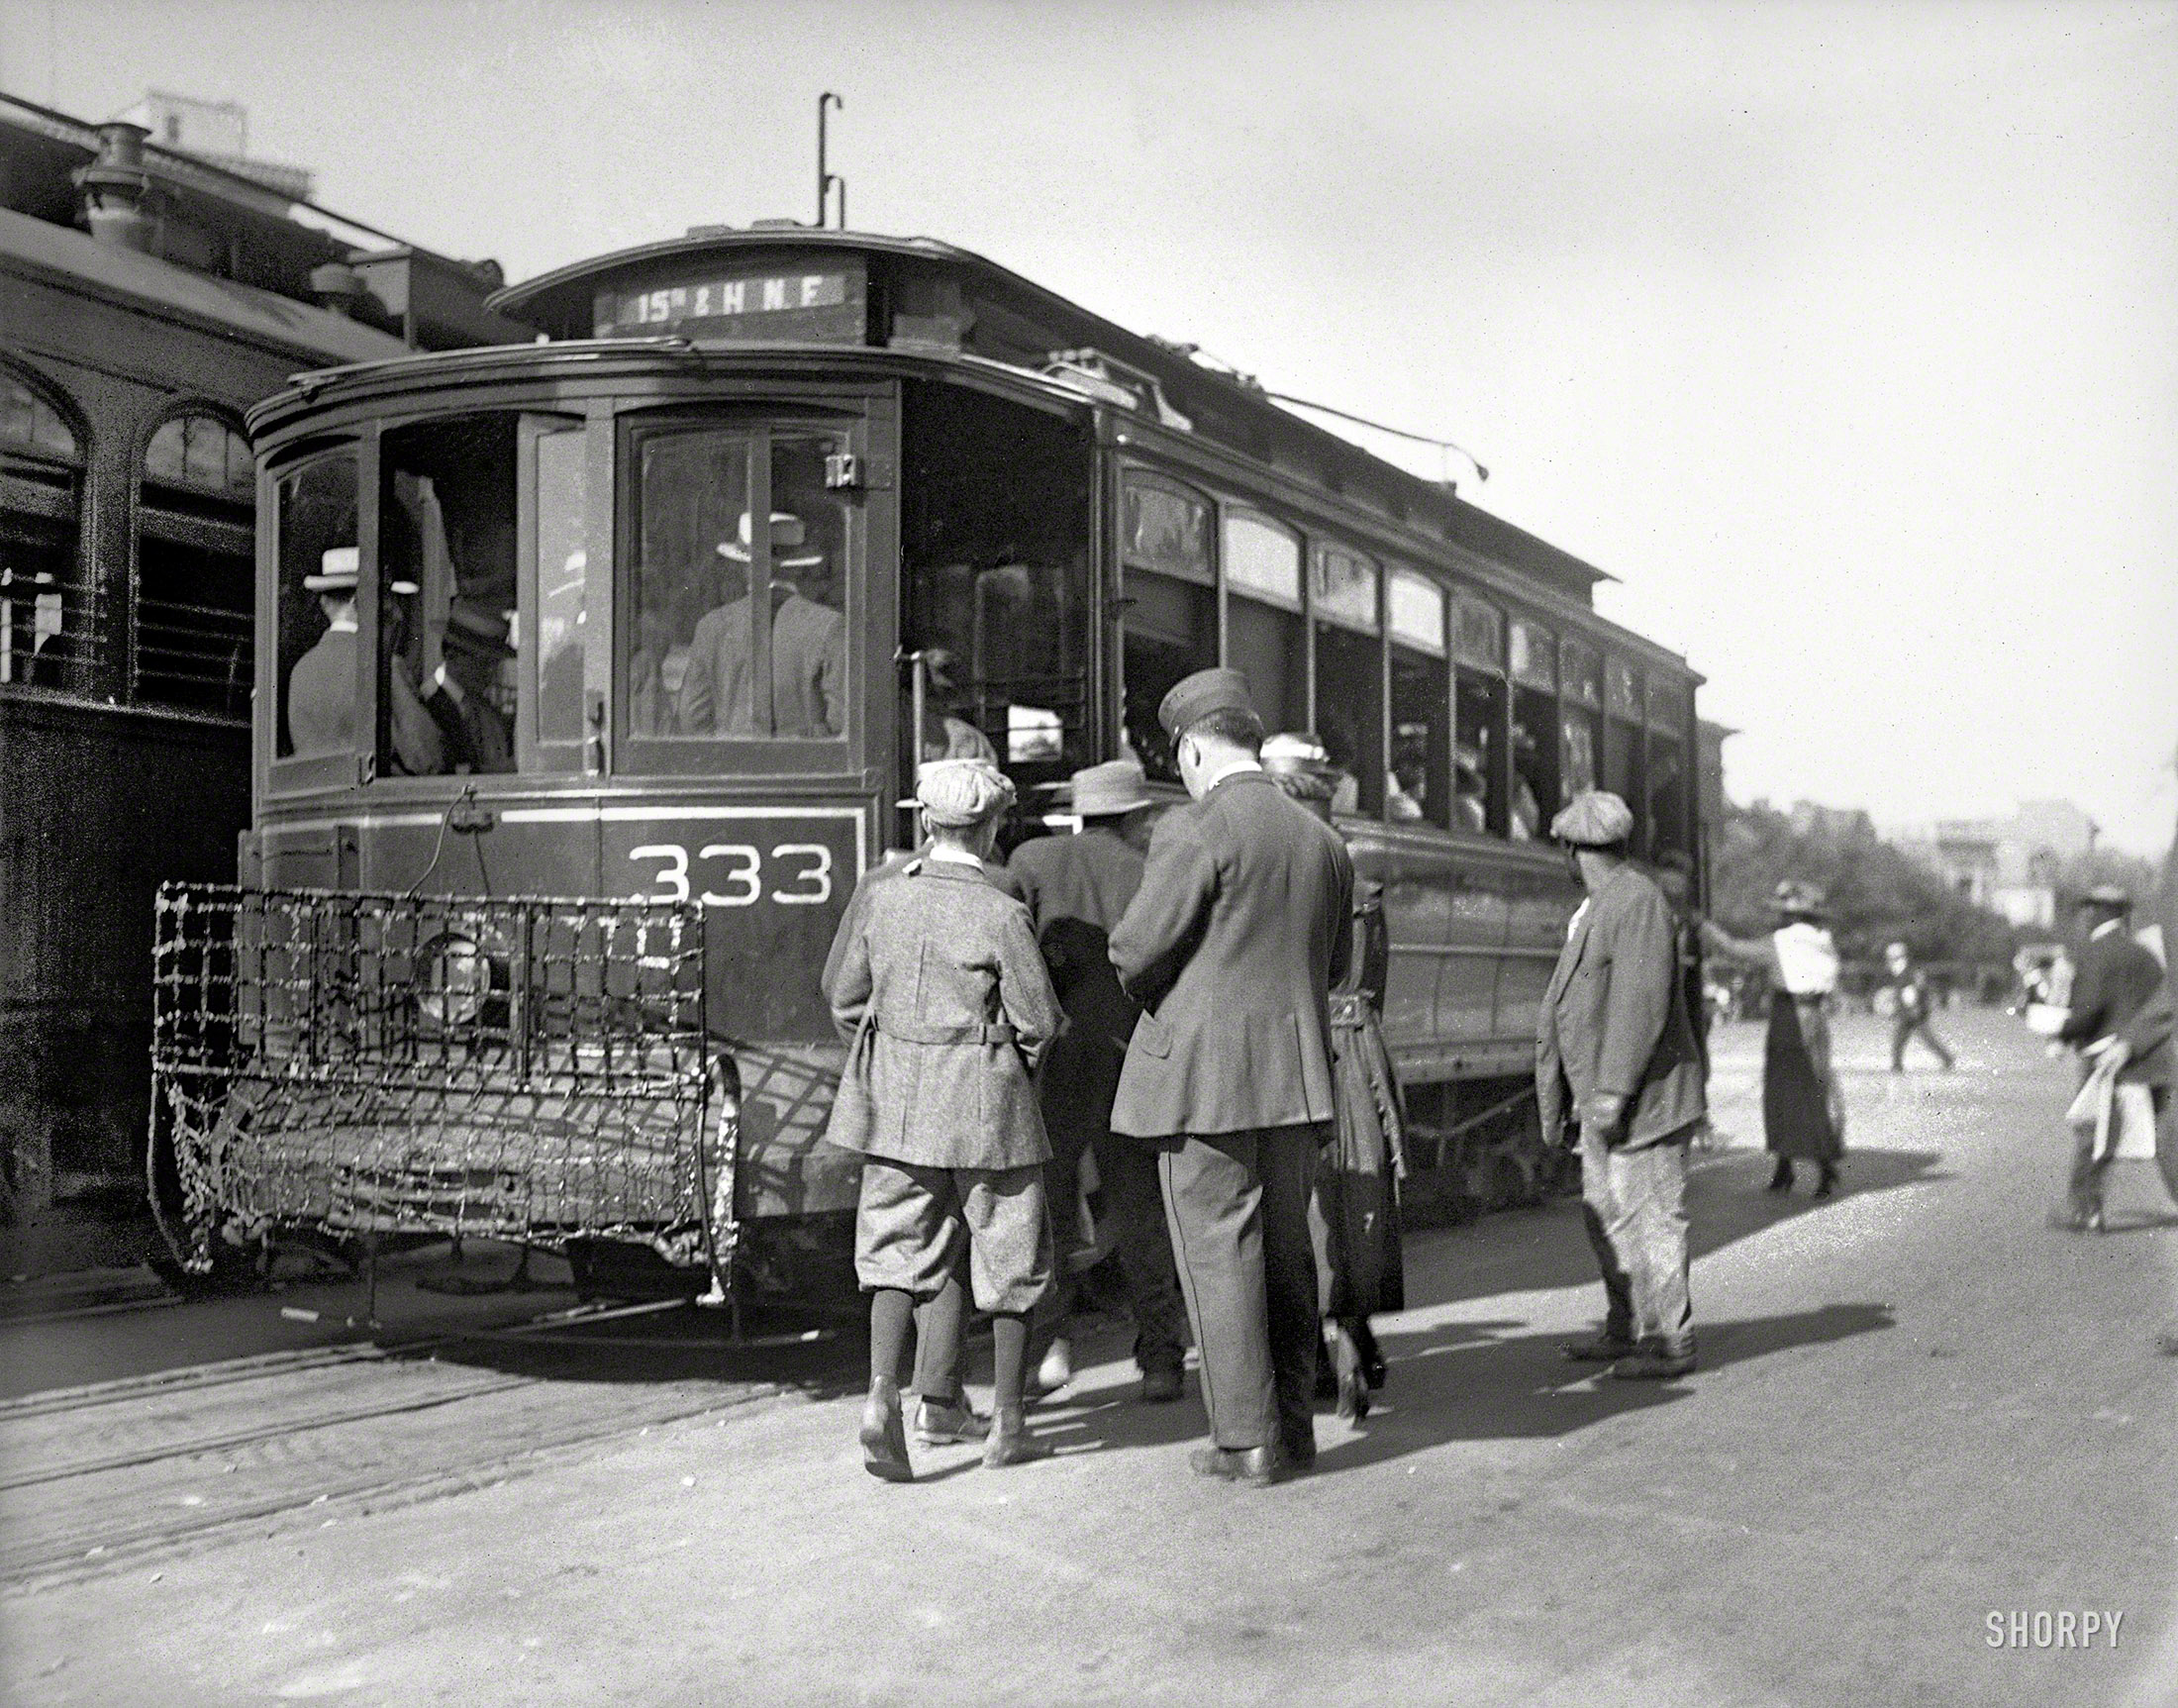 Circa 1919. "Streetcar in Washington, D.C." With what seems to be a pedestrian-scooper in the "up" position. National Photo glass negative. View full size.